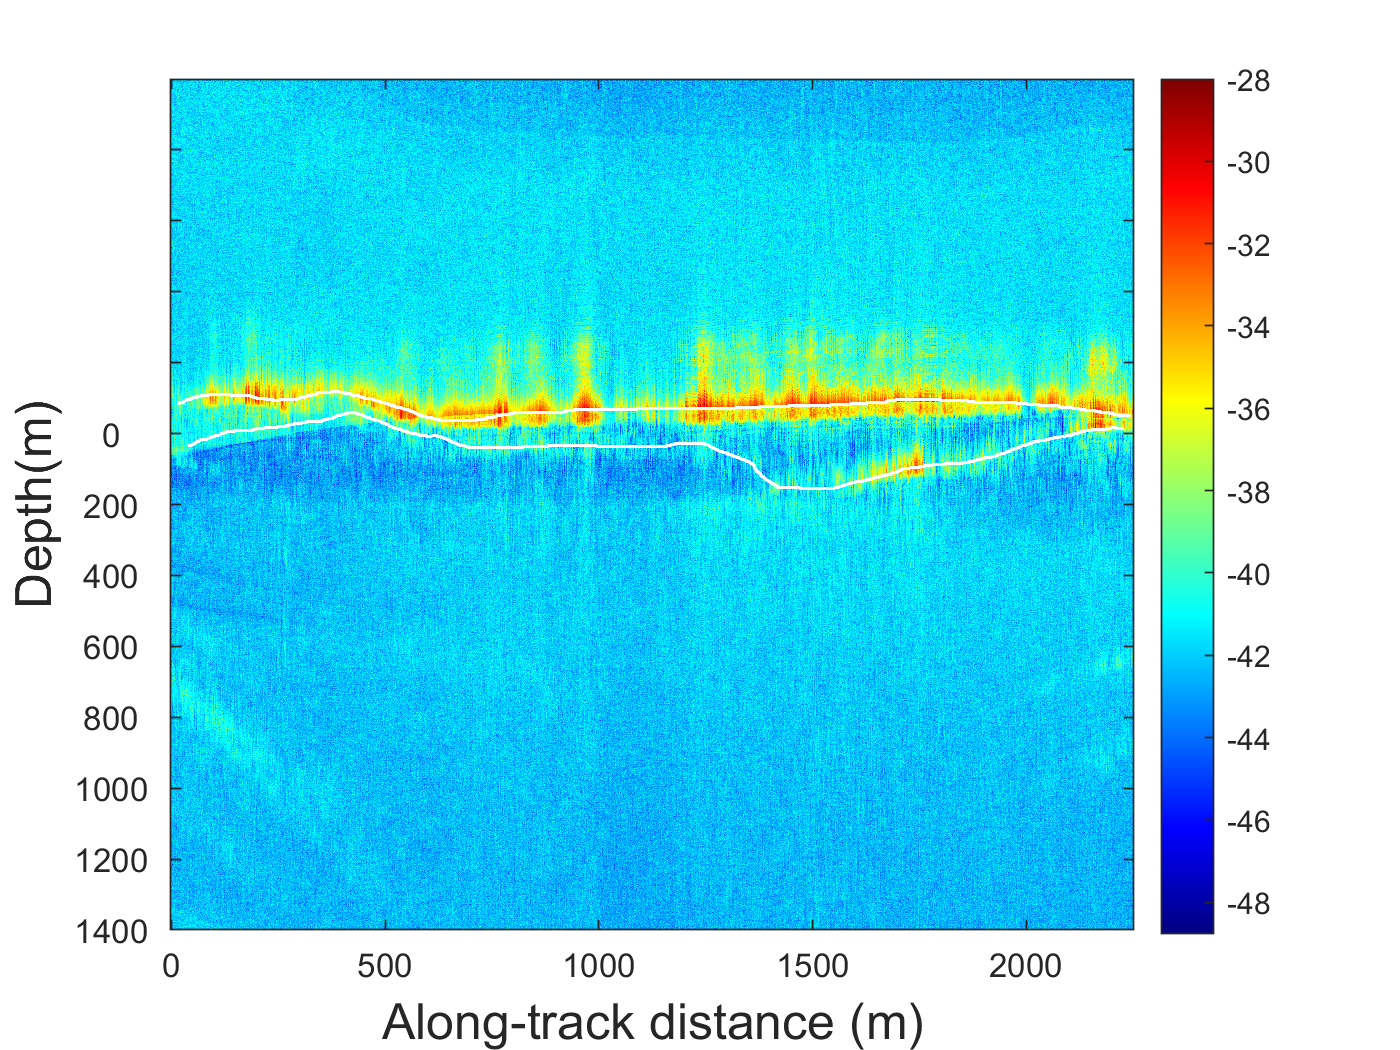 Glacier-bedrock interface data based on VHF band obtained by airborne radar. /AIRI 